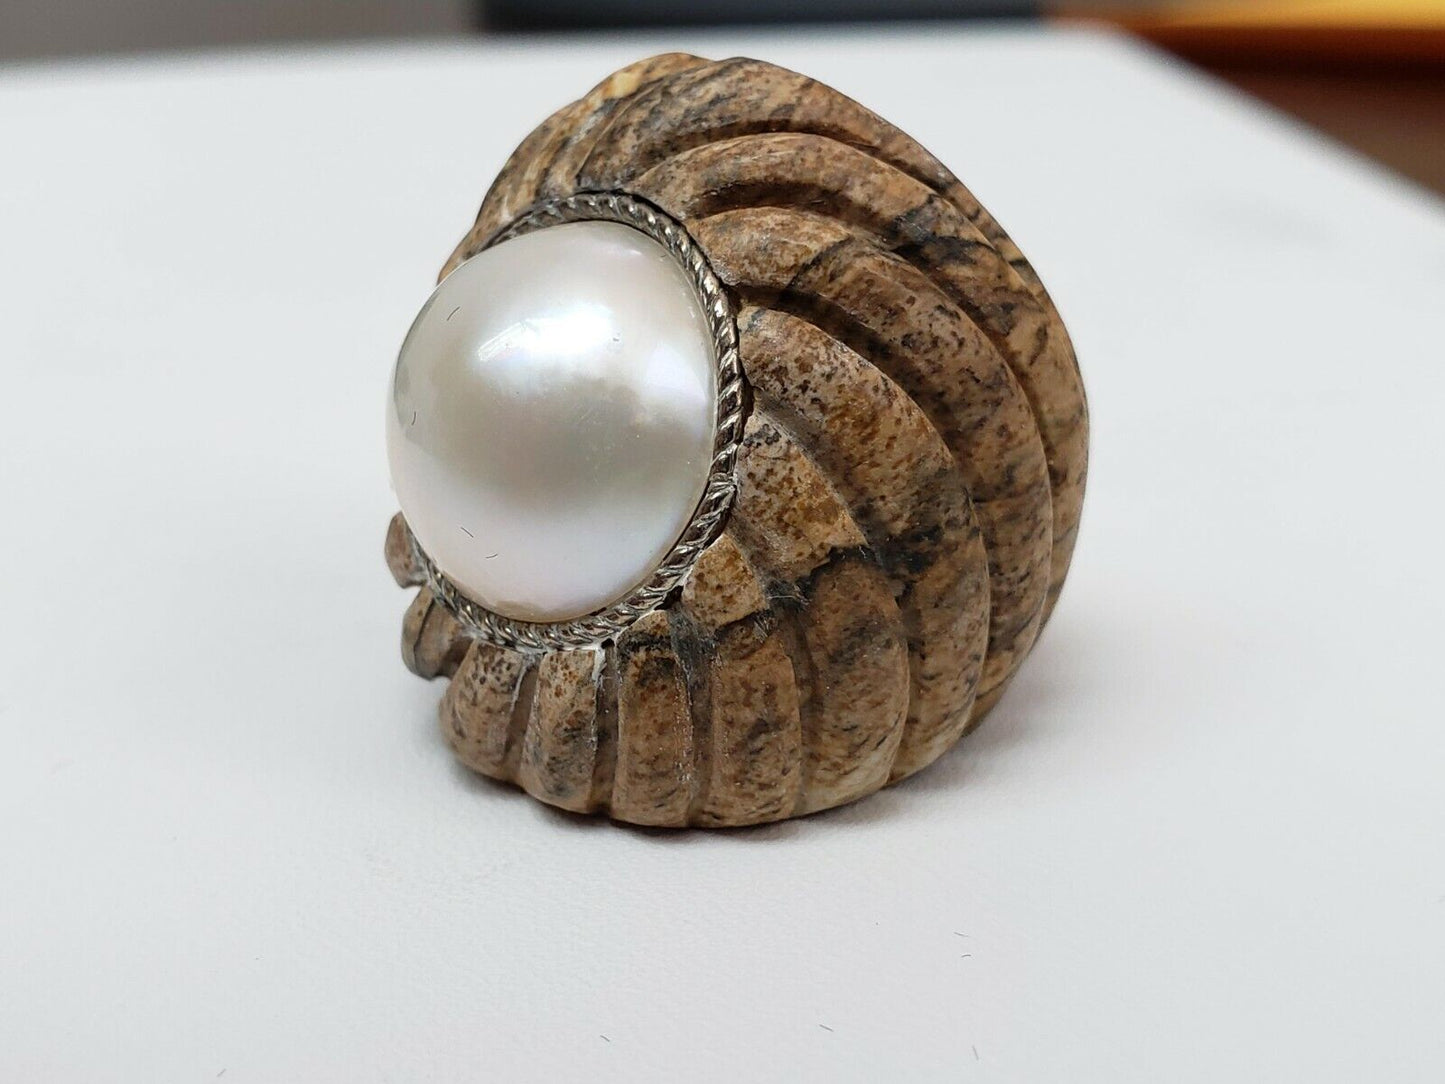 Colleen Lopez Calcite And Cultured Mabé Pearl Ring, Size 5.5 Hsn $60